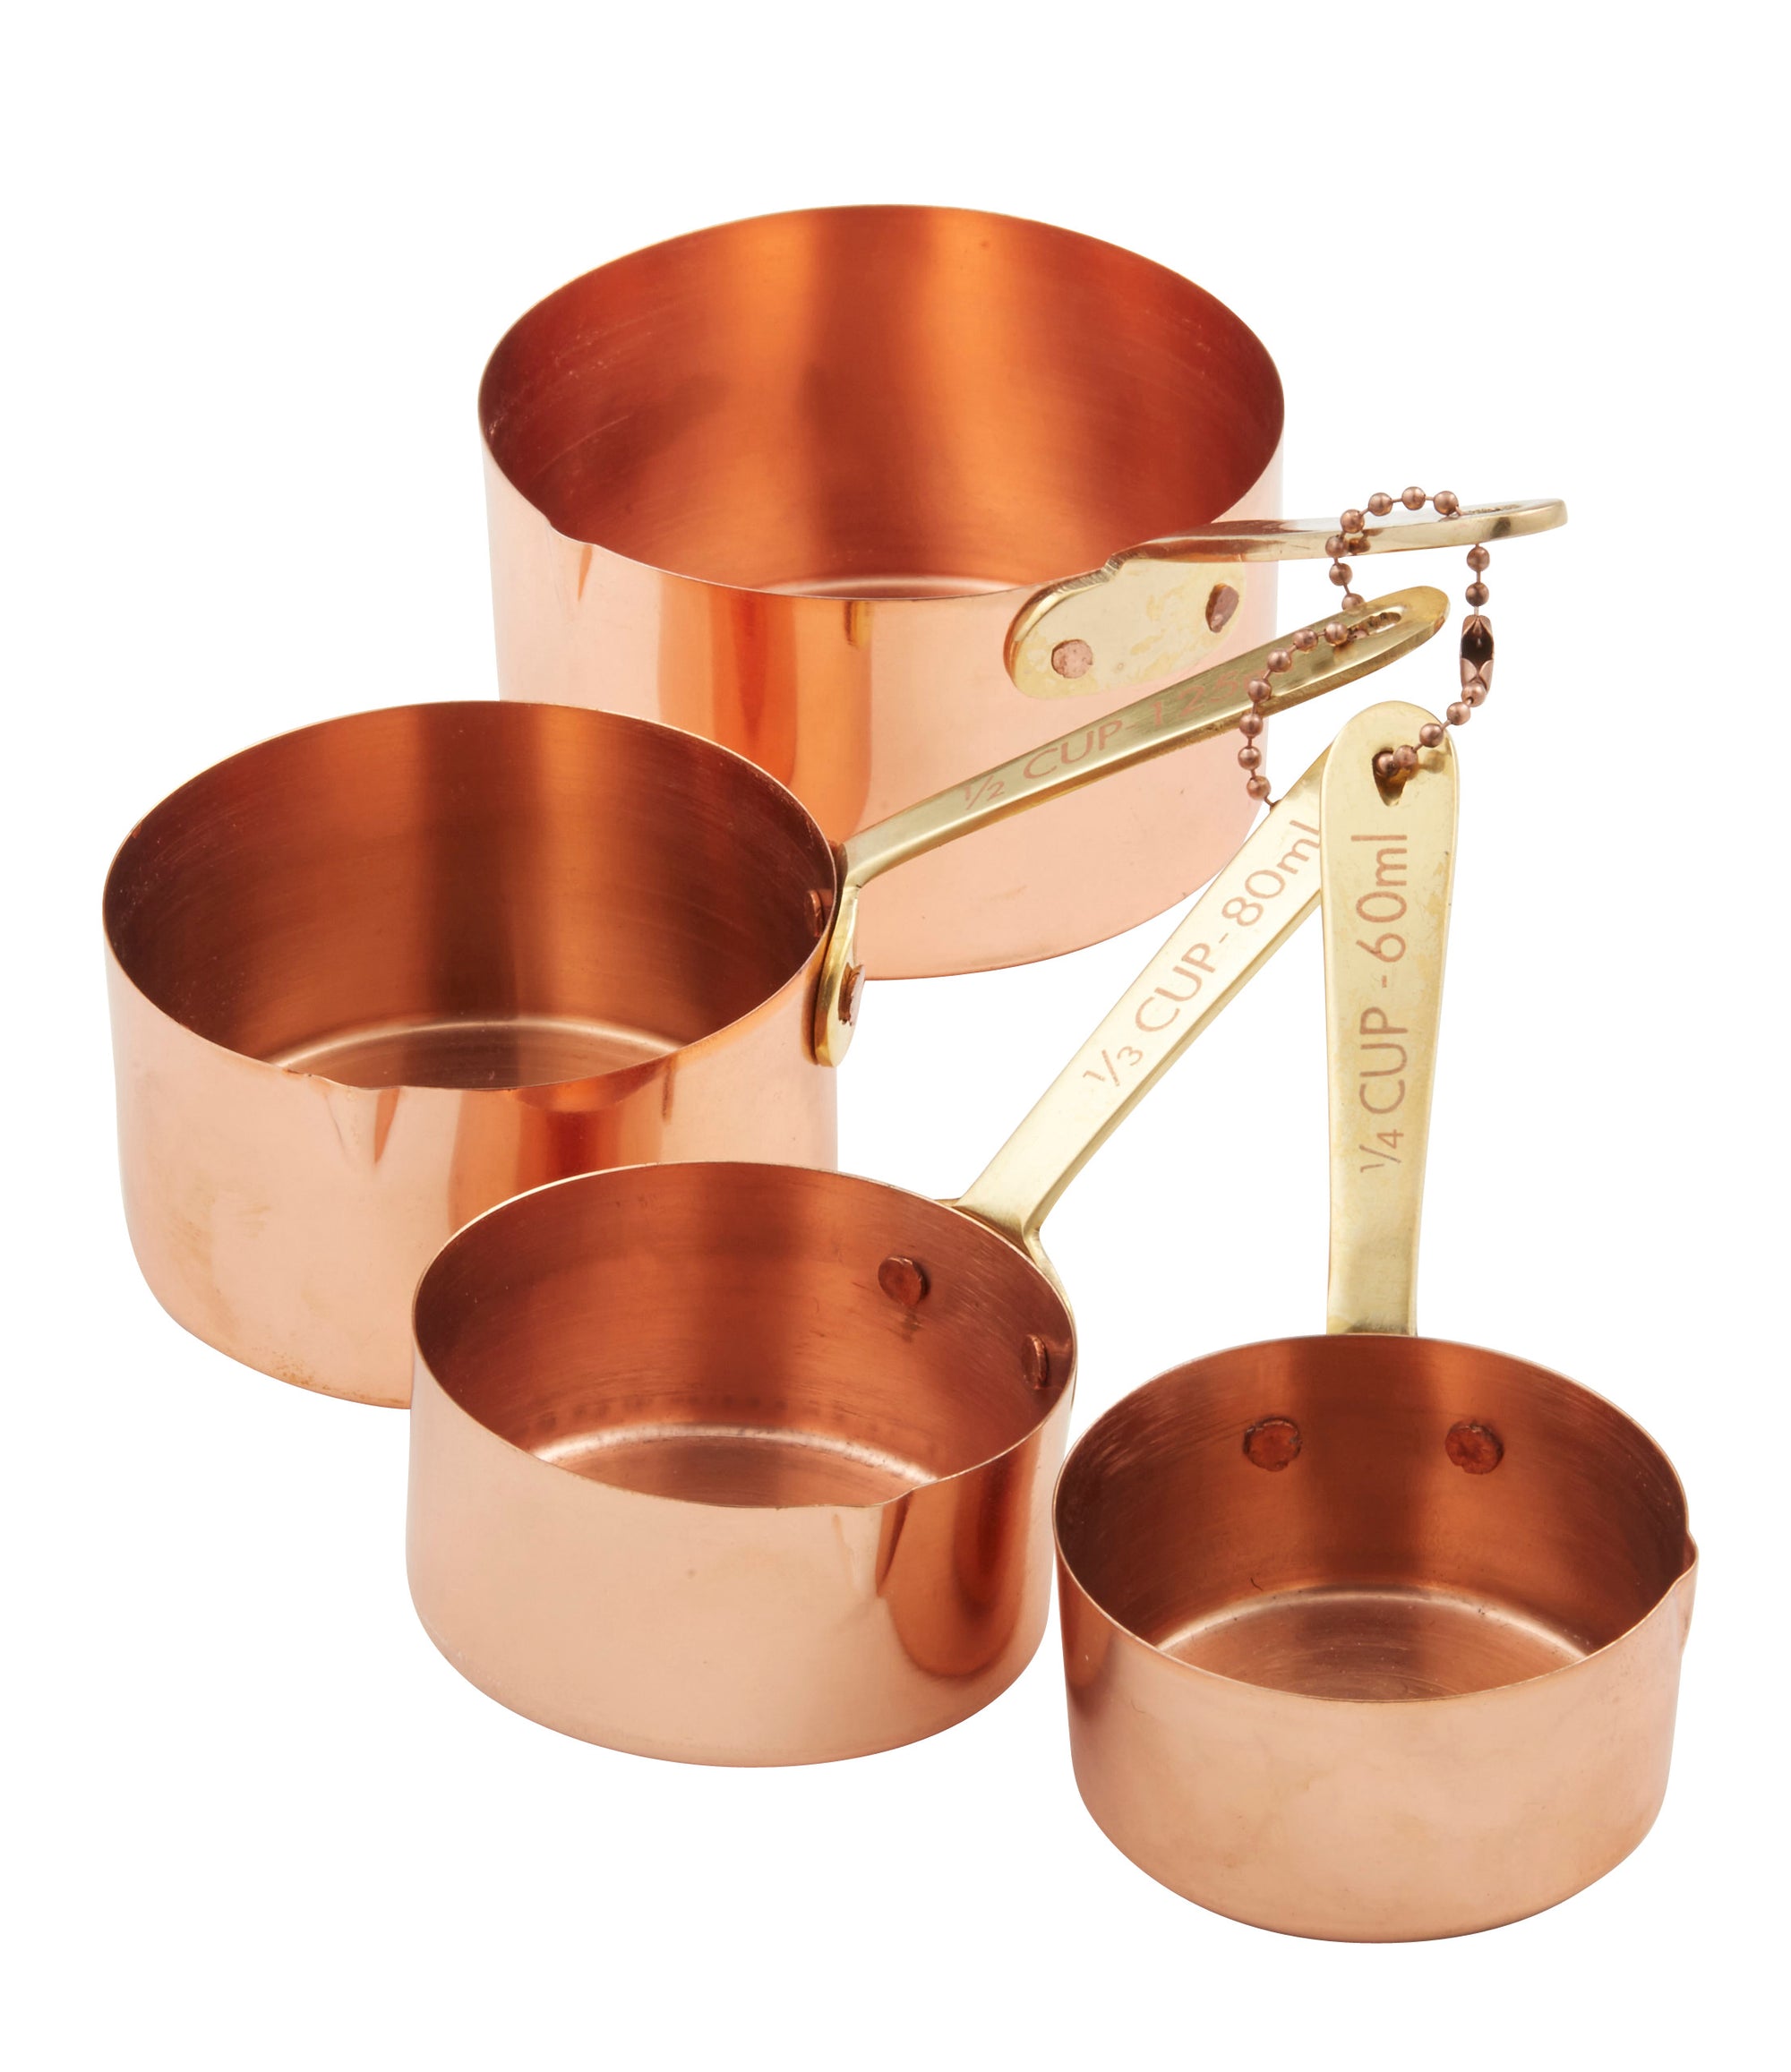 ACADEMY COPPER PLATED MEASURING CUPS W BRASS HANDLES 4PCE BRASS/COPPER